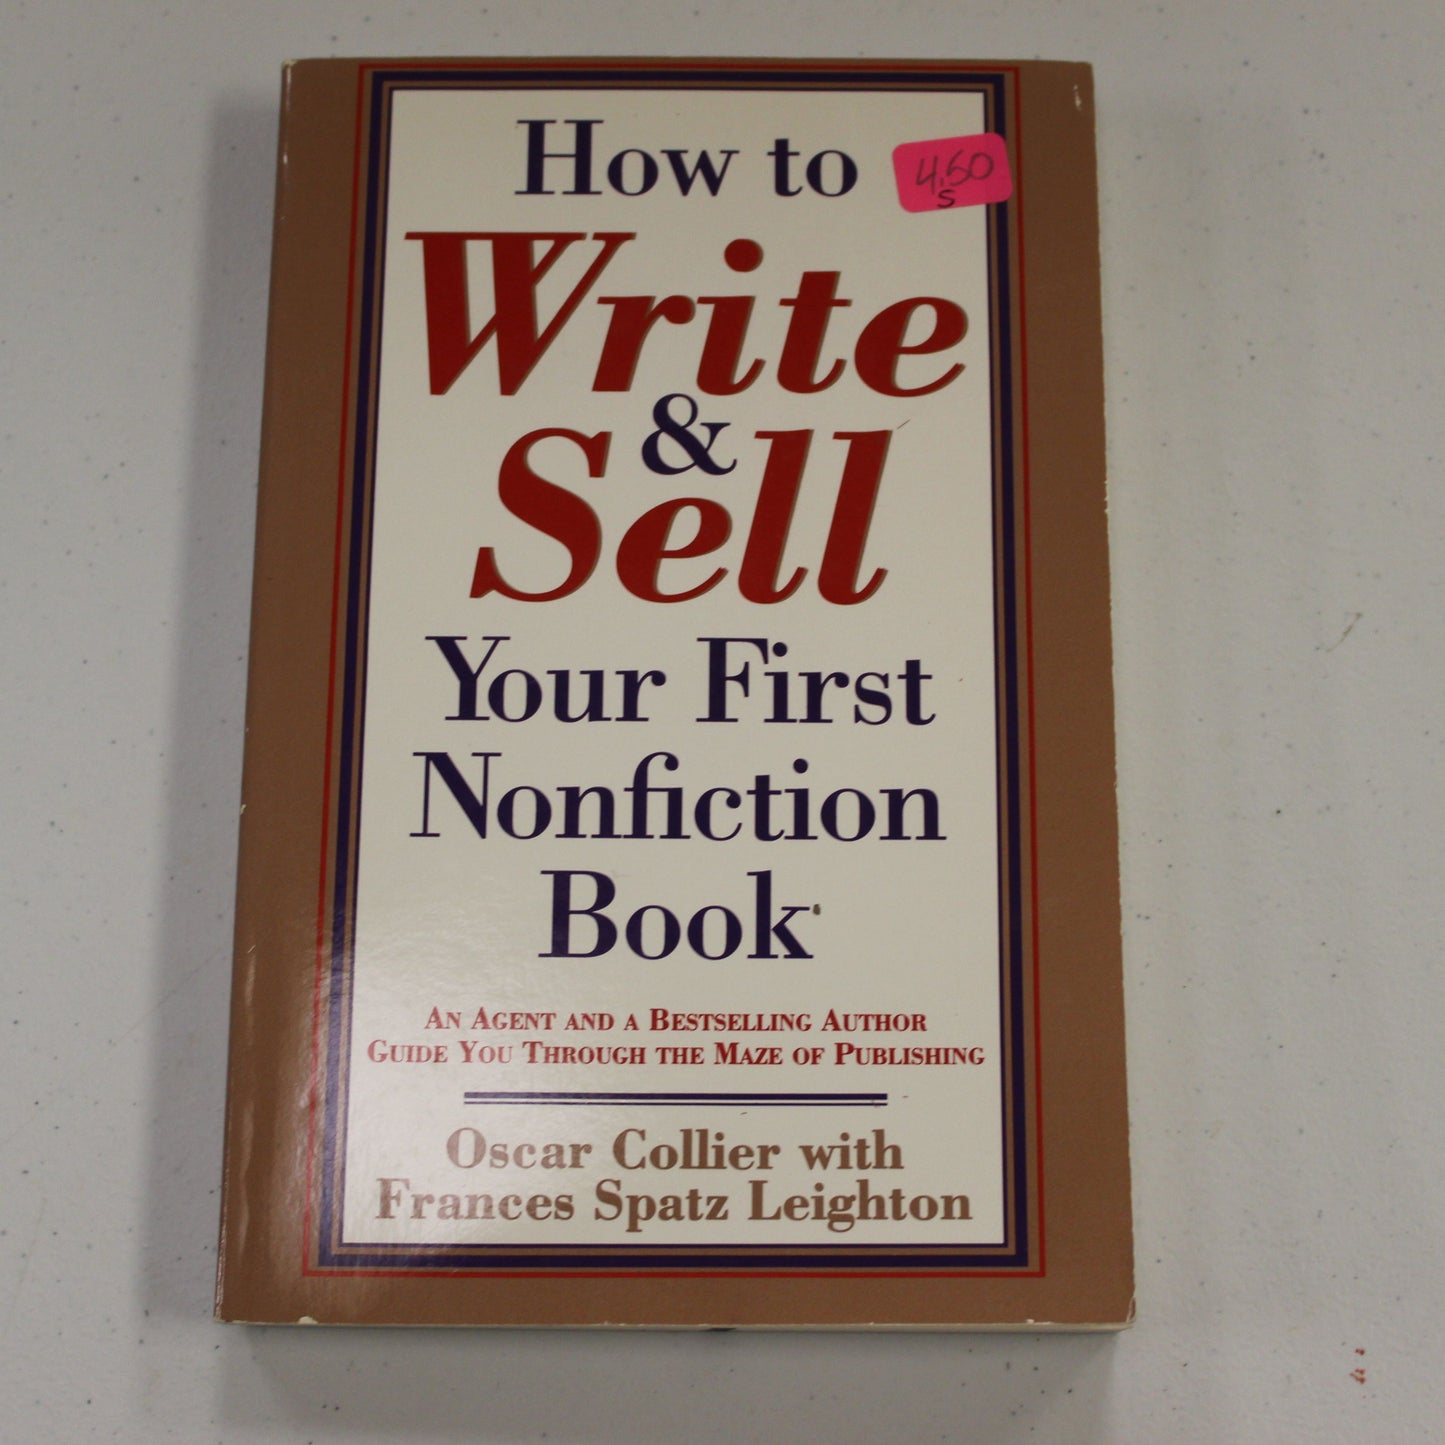 HOW TO WRITE & SELL YOUR FIRST NONFICTION BOOK